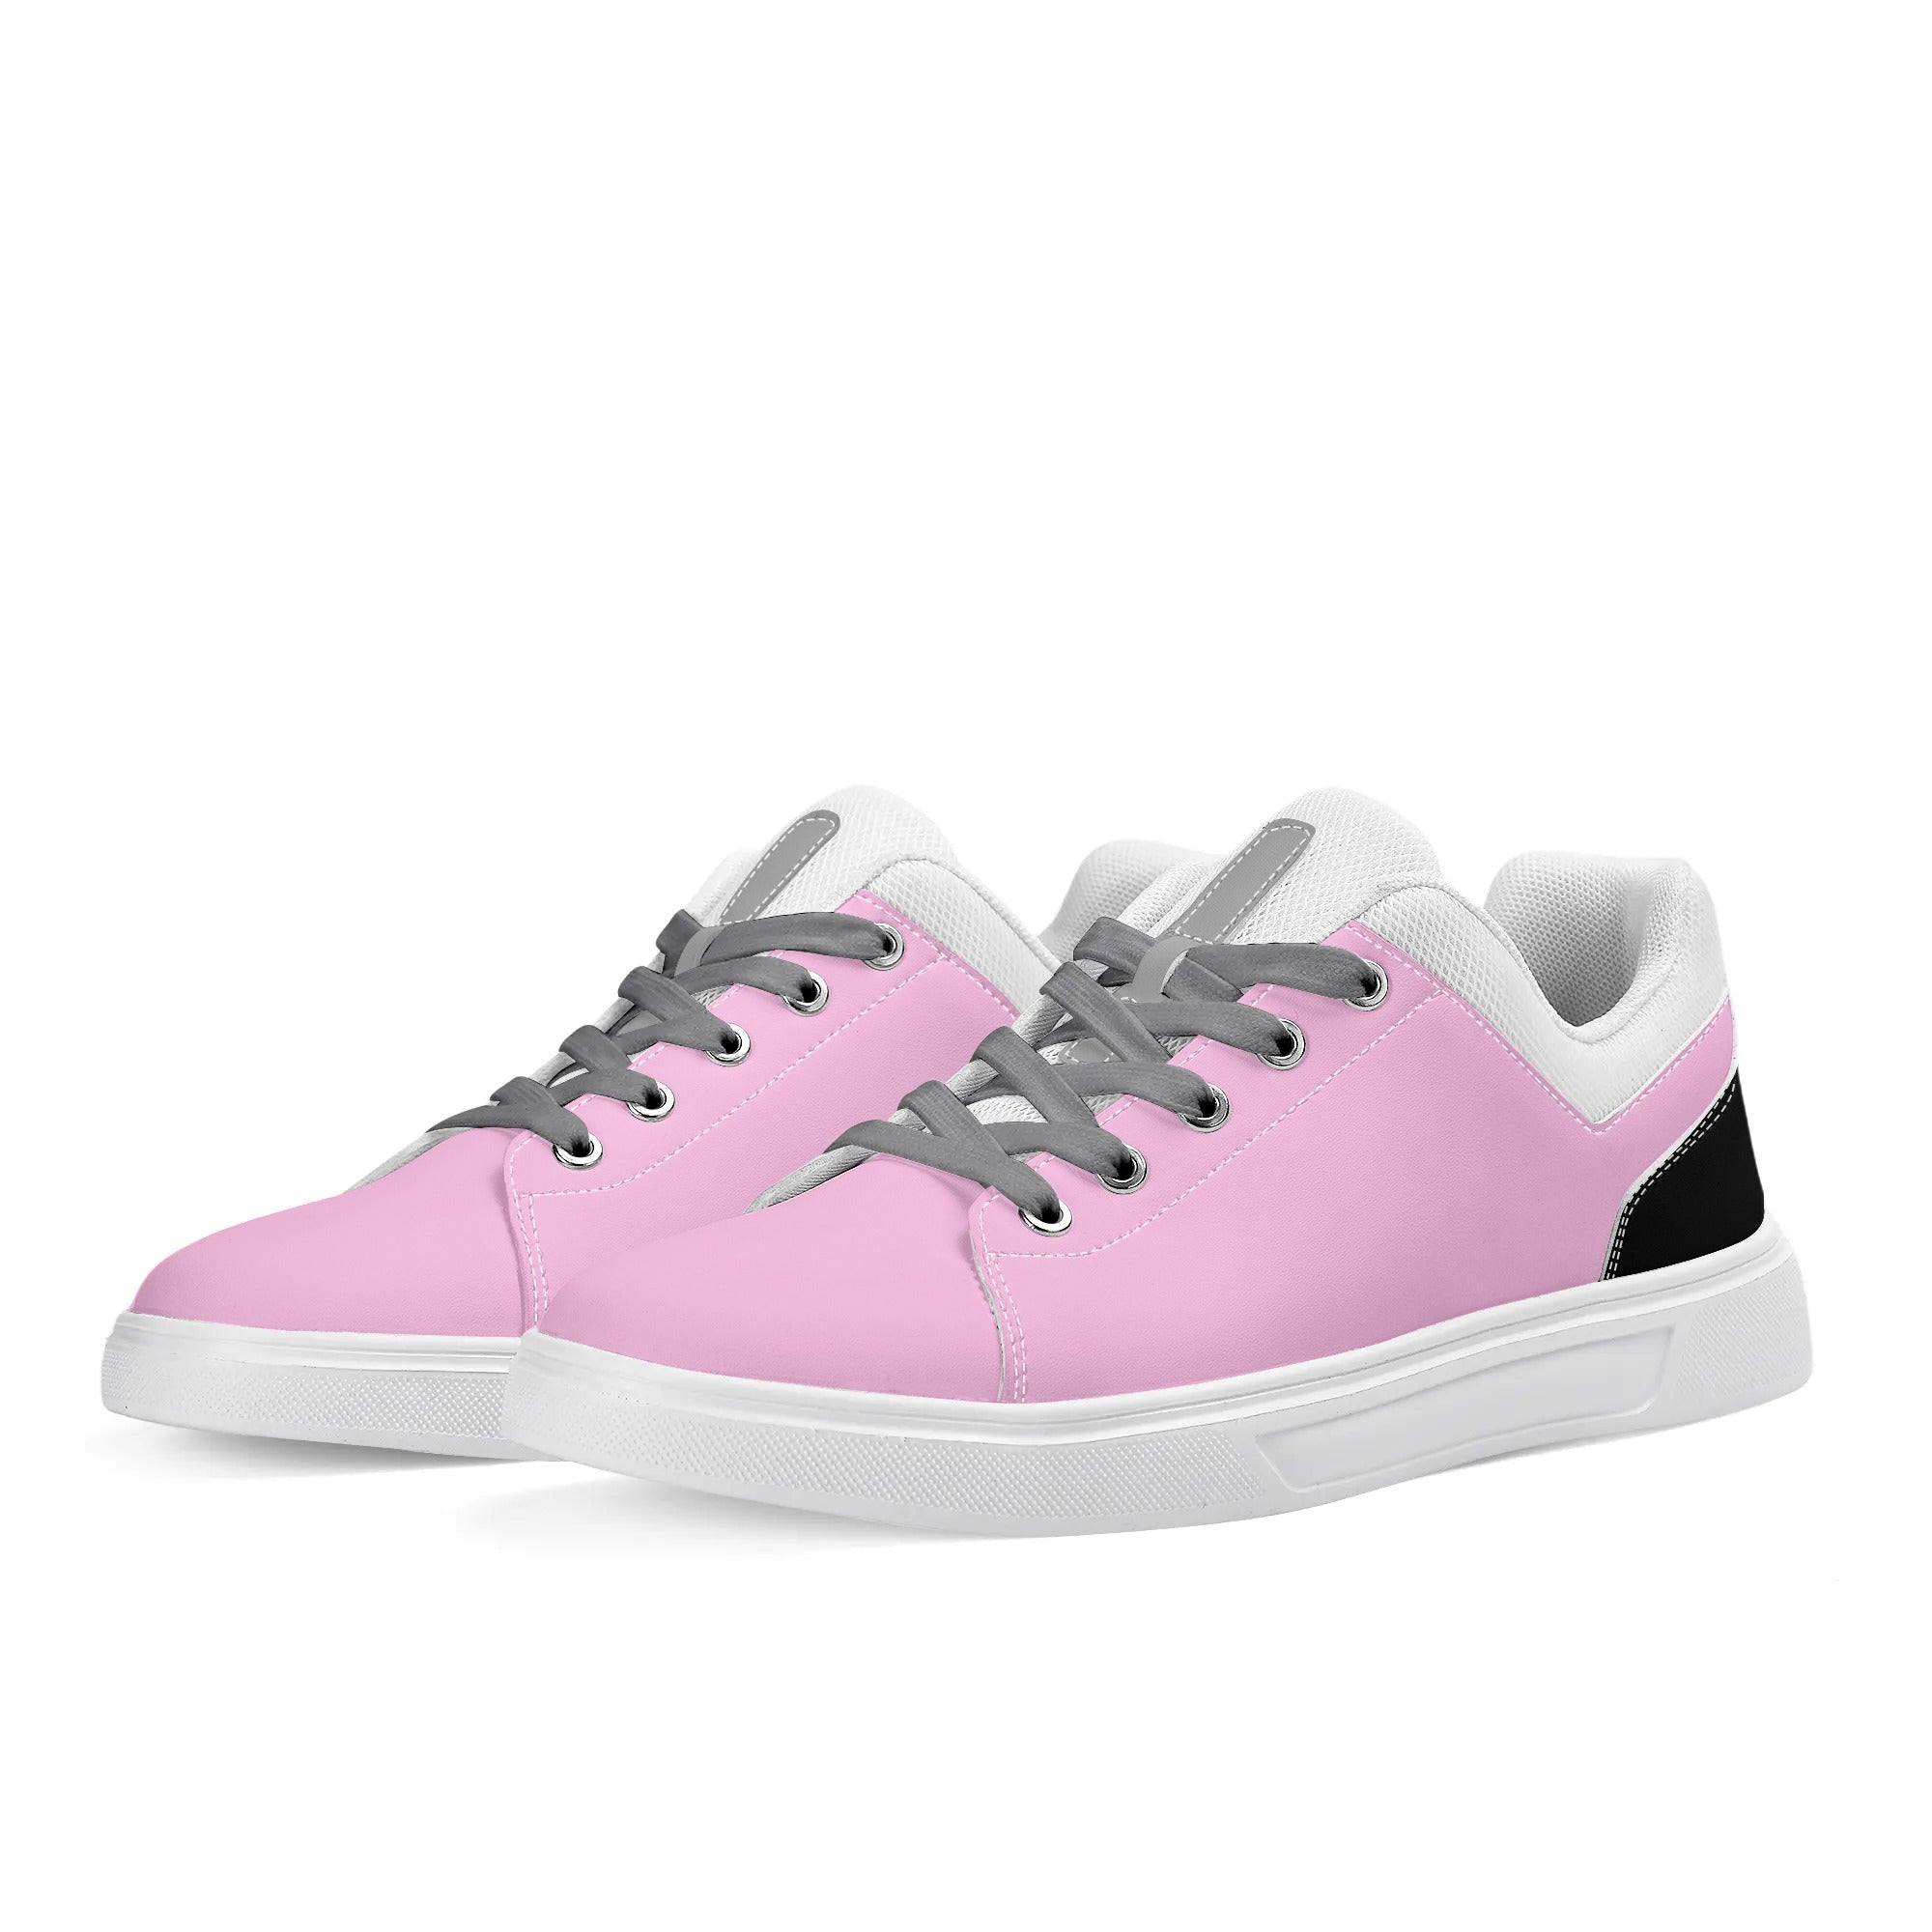 White - Pink Unisex Lightweight Brand Low Top PU Mesh Skateboard Shoes - unisex sneakers at TFC&H Co.